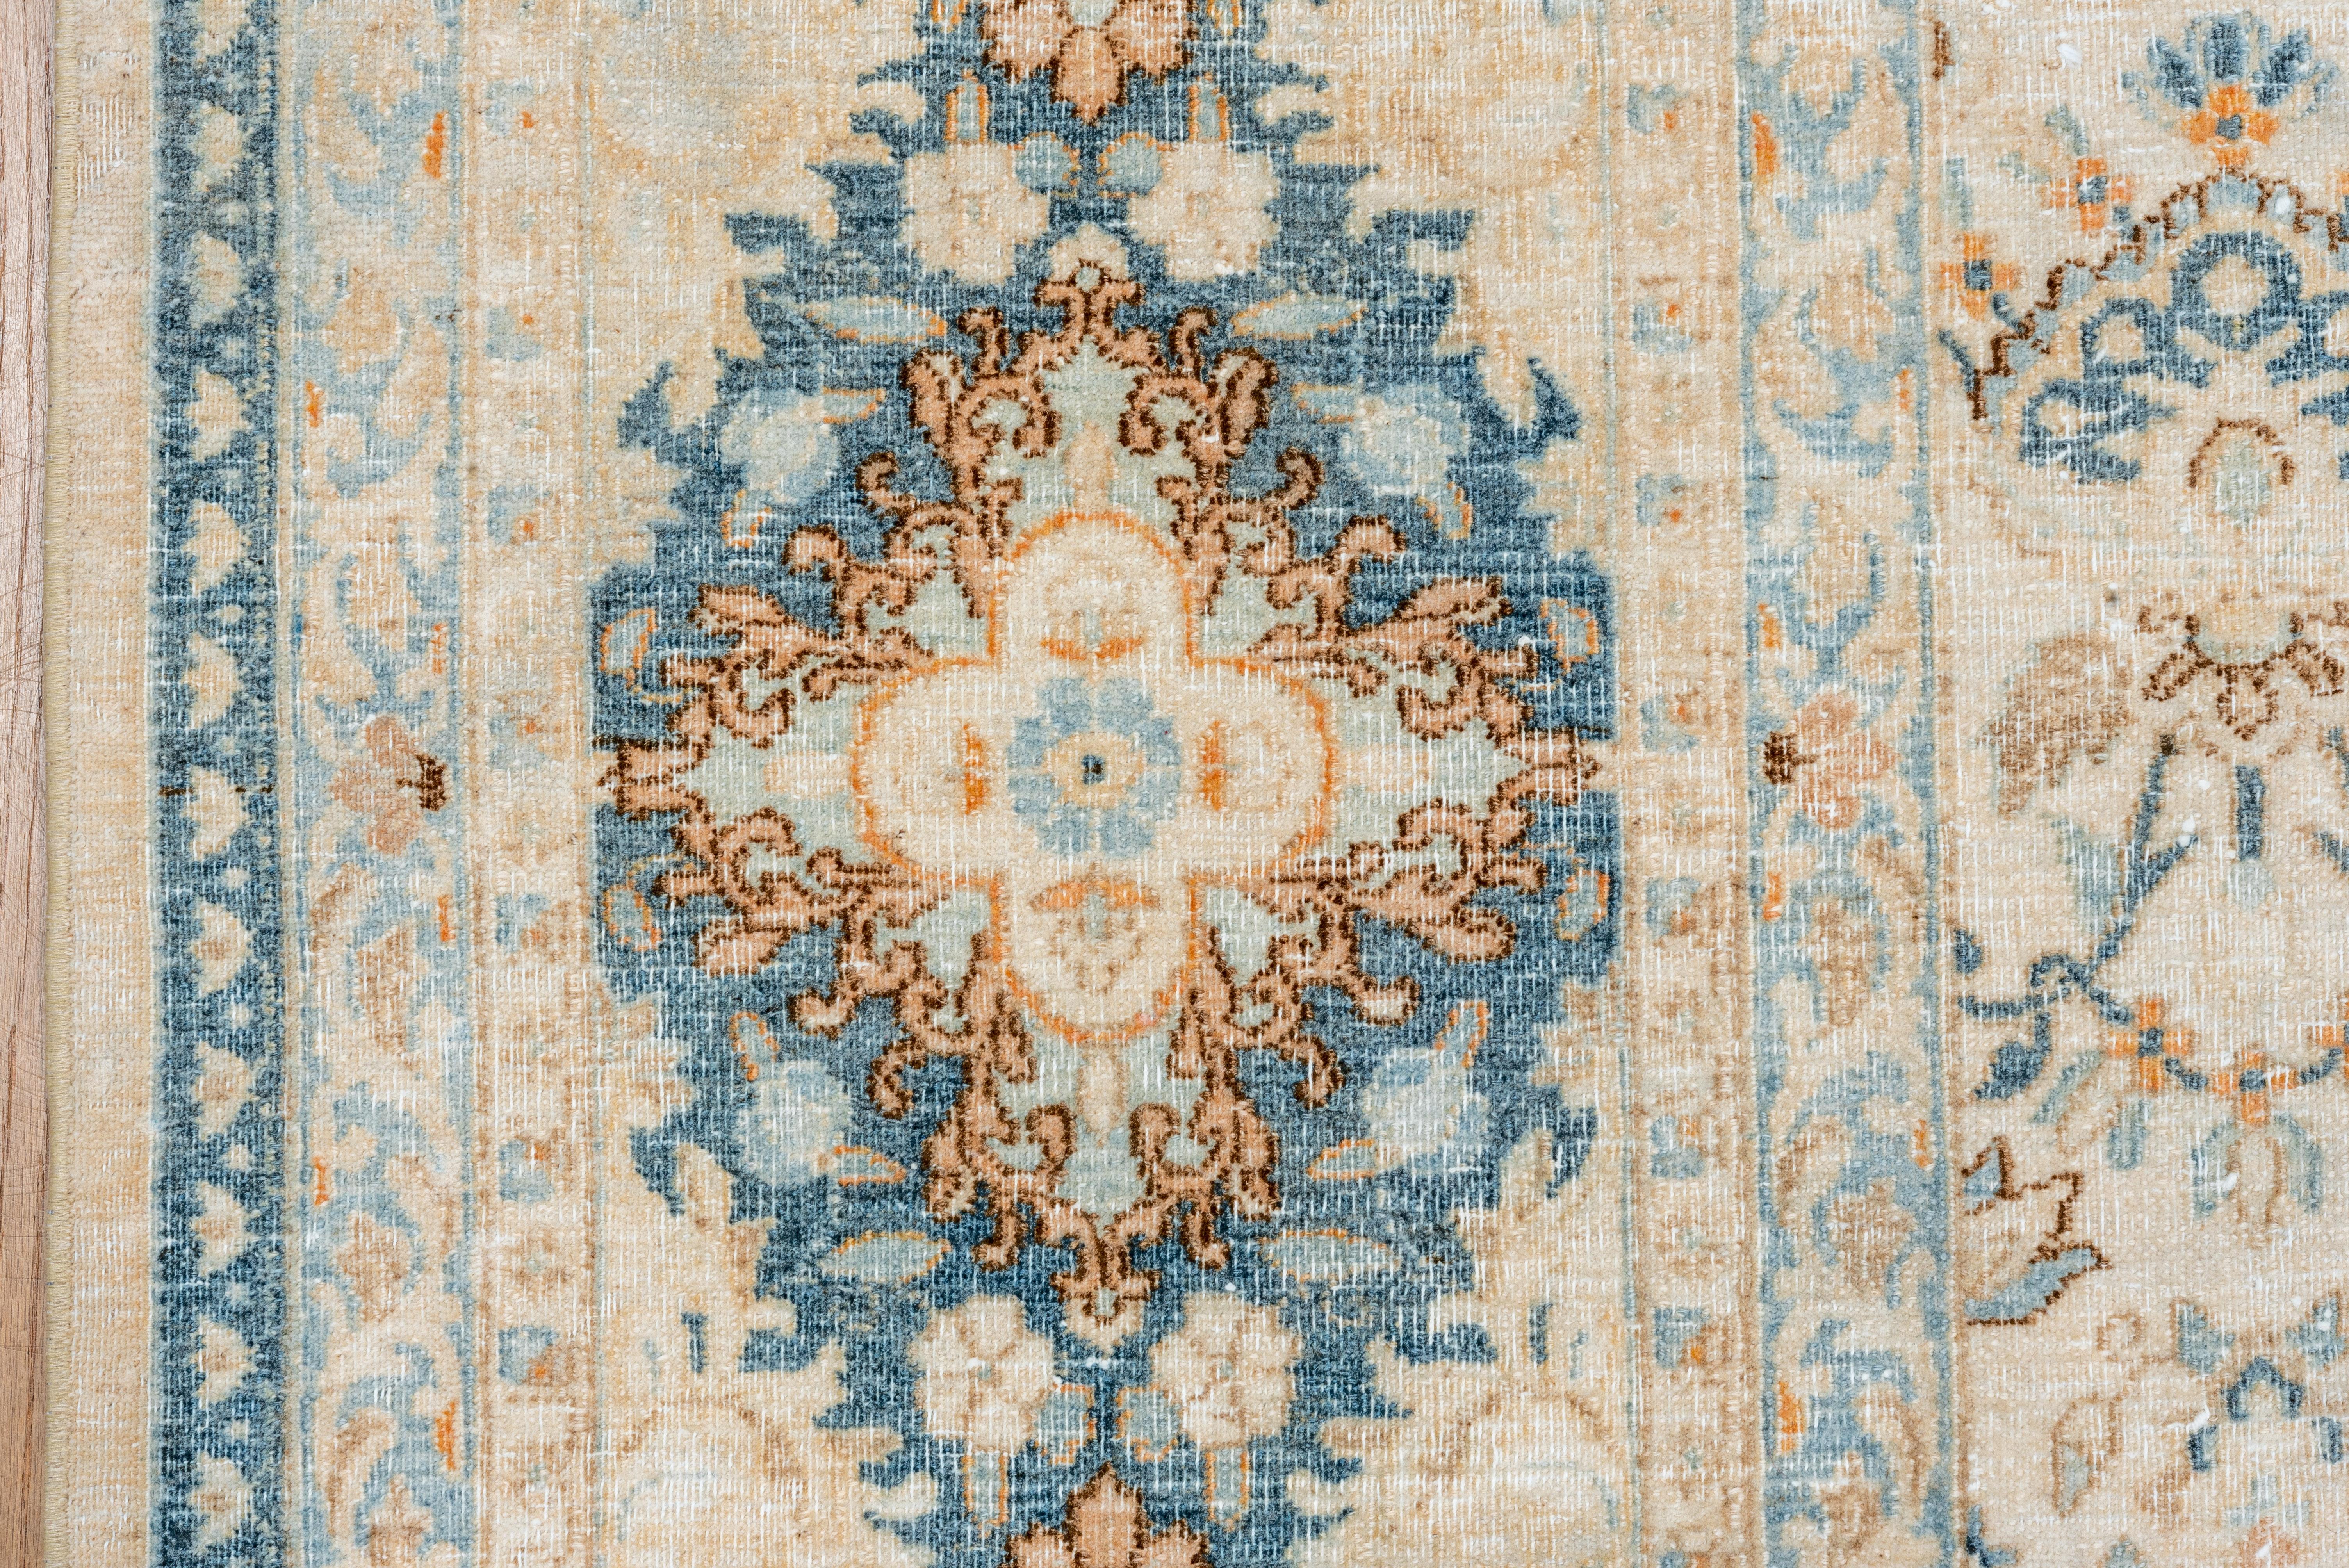 Kirman Eliko Rugs by David Ariel Antique Kerman Rug, Allover Field, Teal Accents For Sale